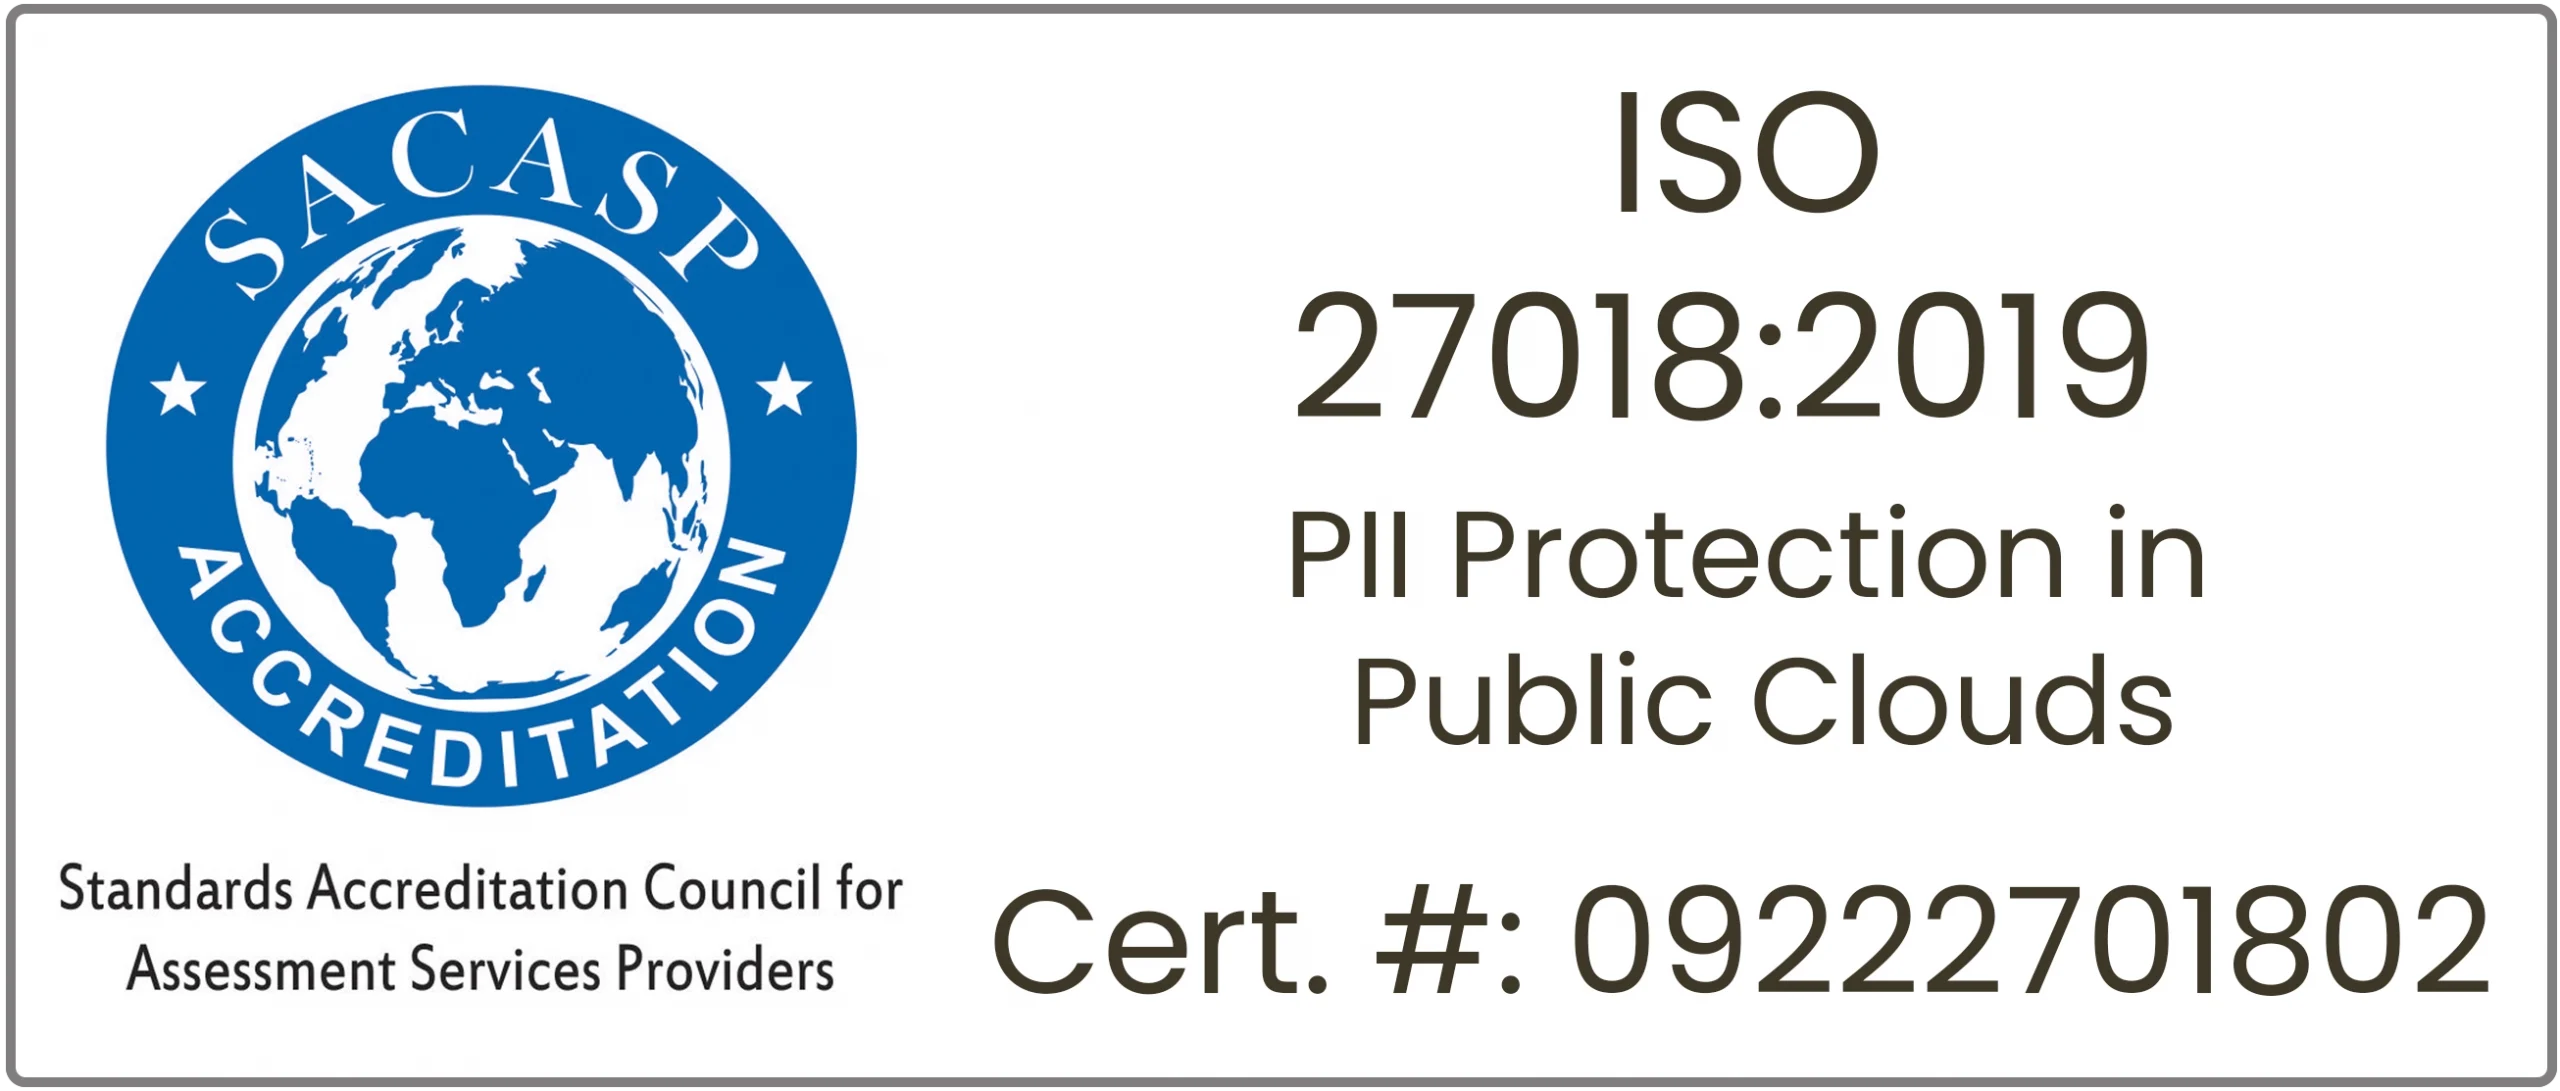 ISO/IEC 27018:2019 - PII Protection in Public Clouds